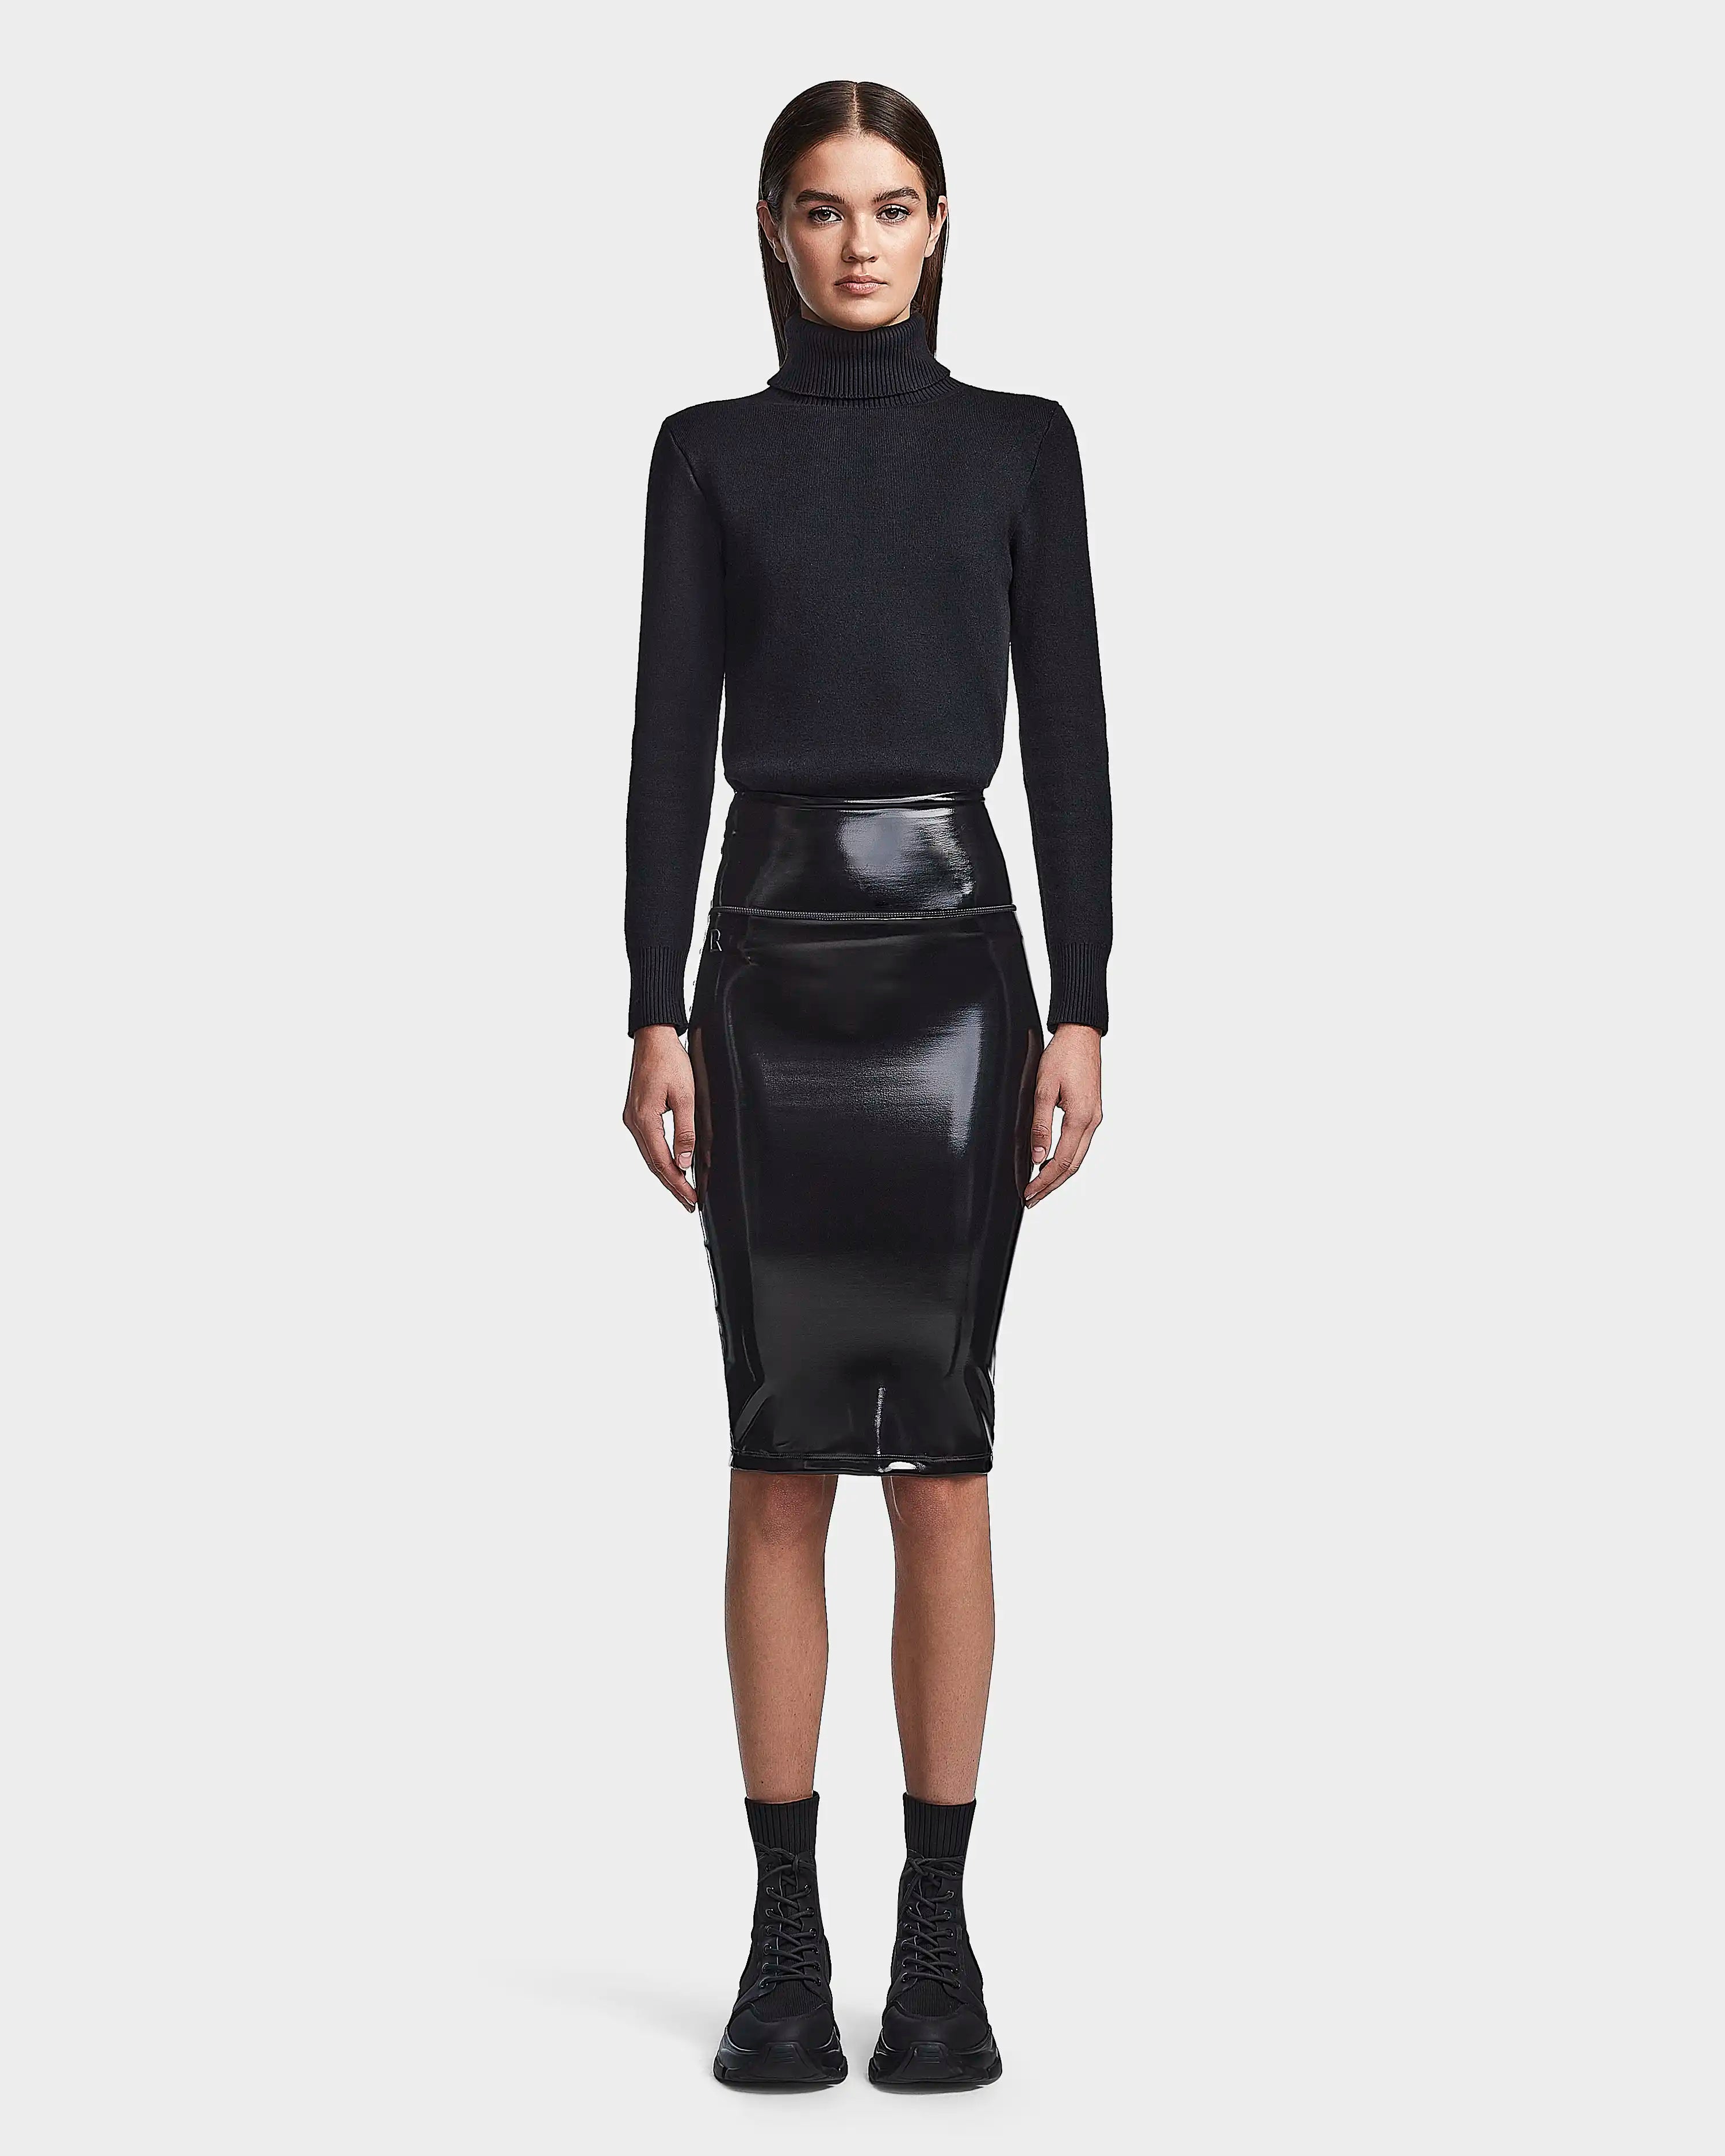 Women's Faux Leather - Pants, Skirts & Jackets